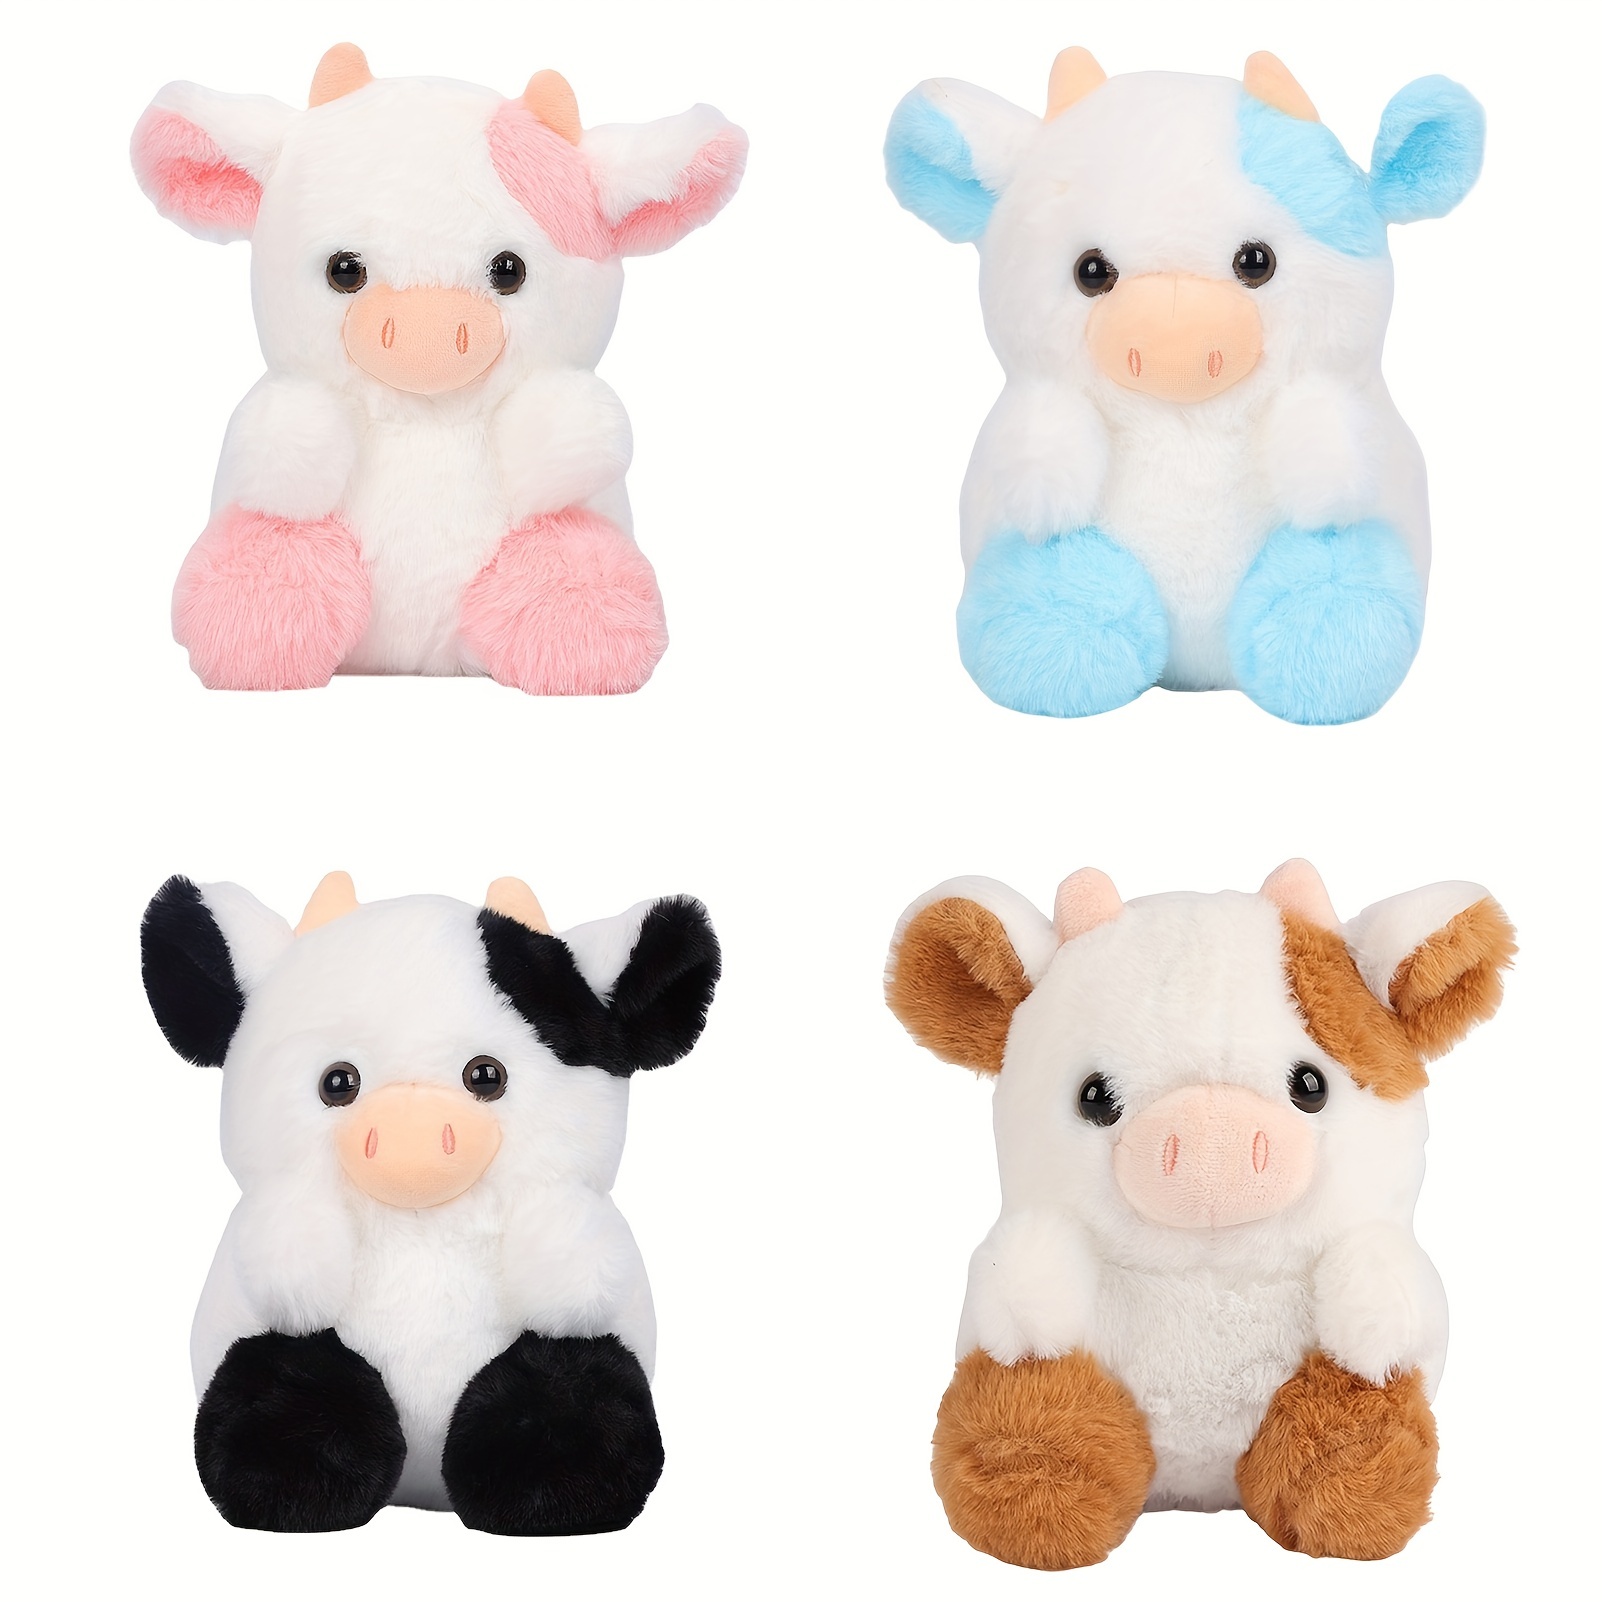 Strawberry Cow Merch & Gifts for Sale